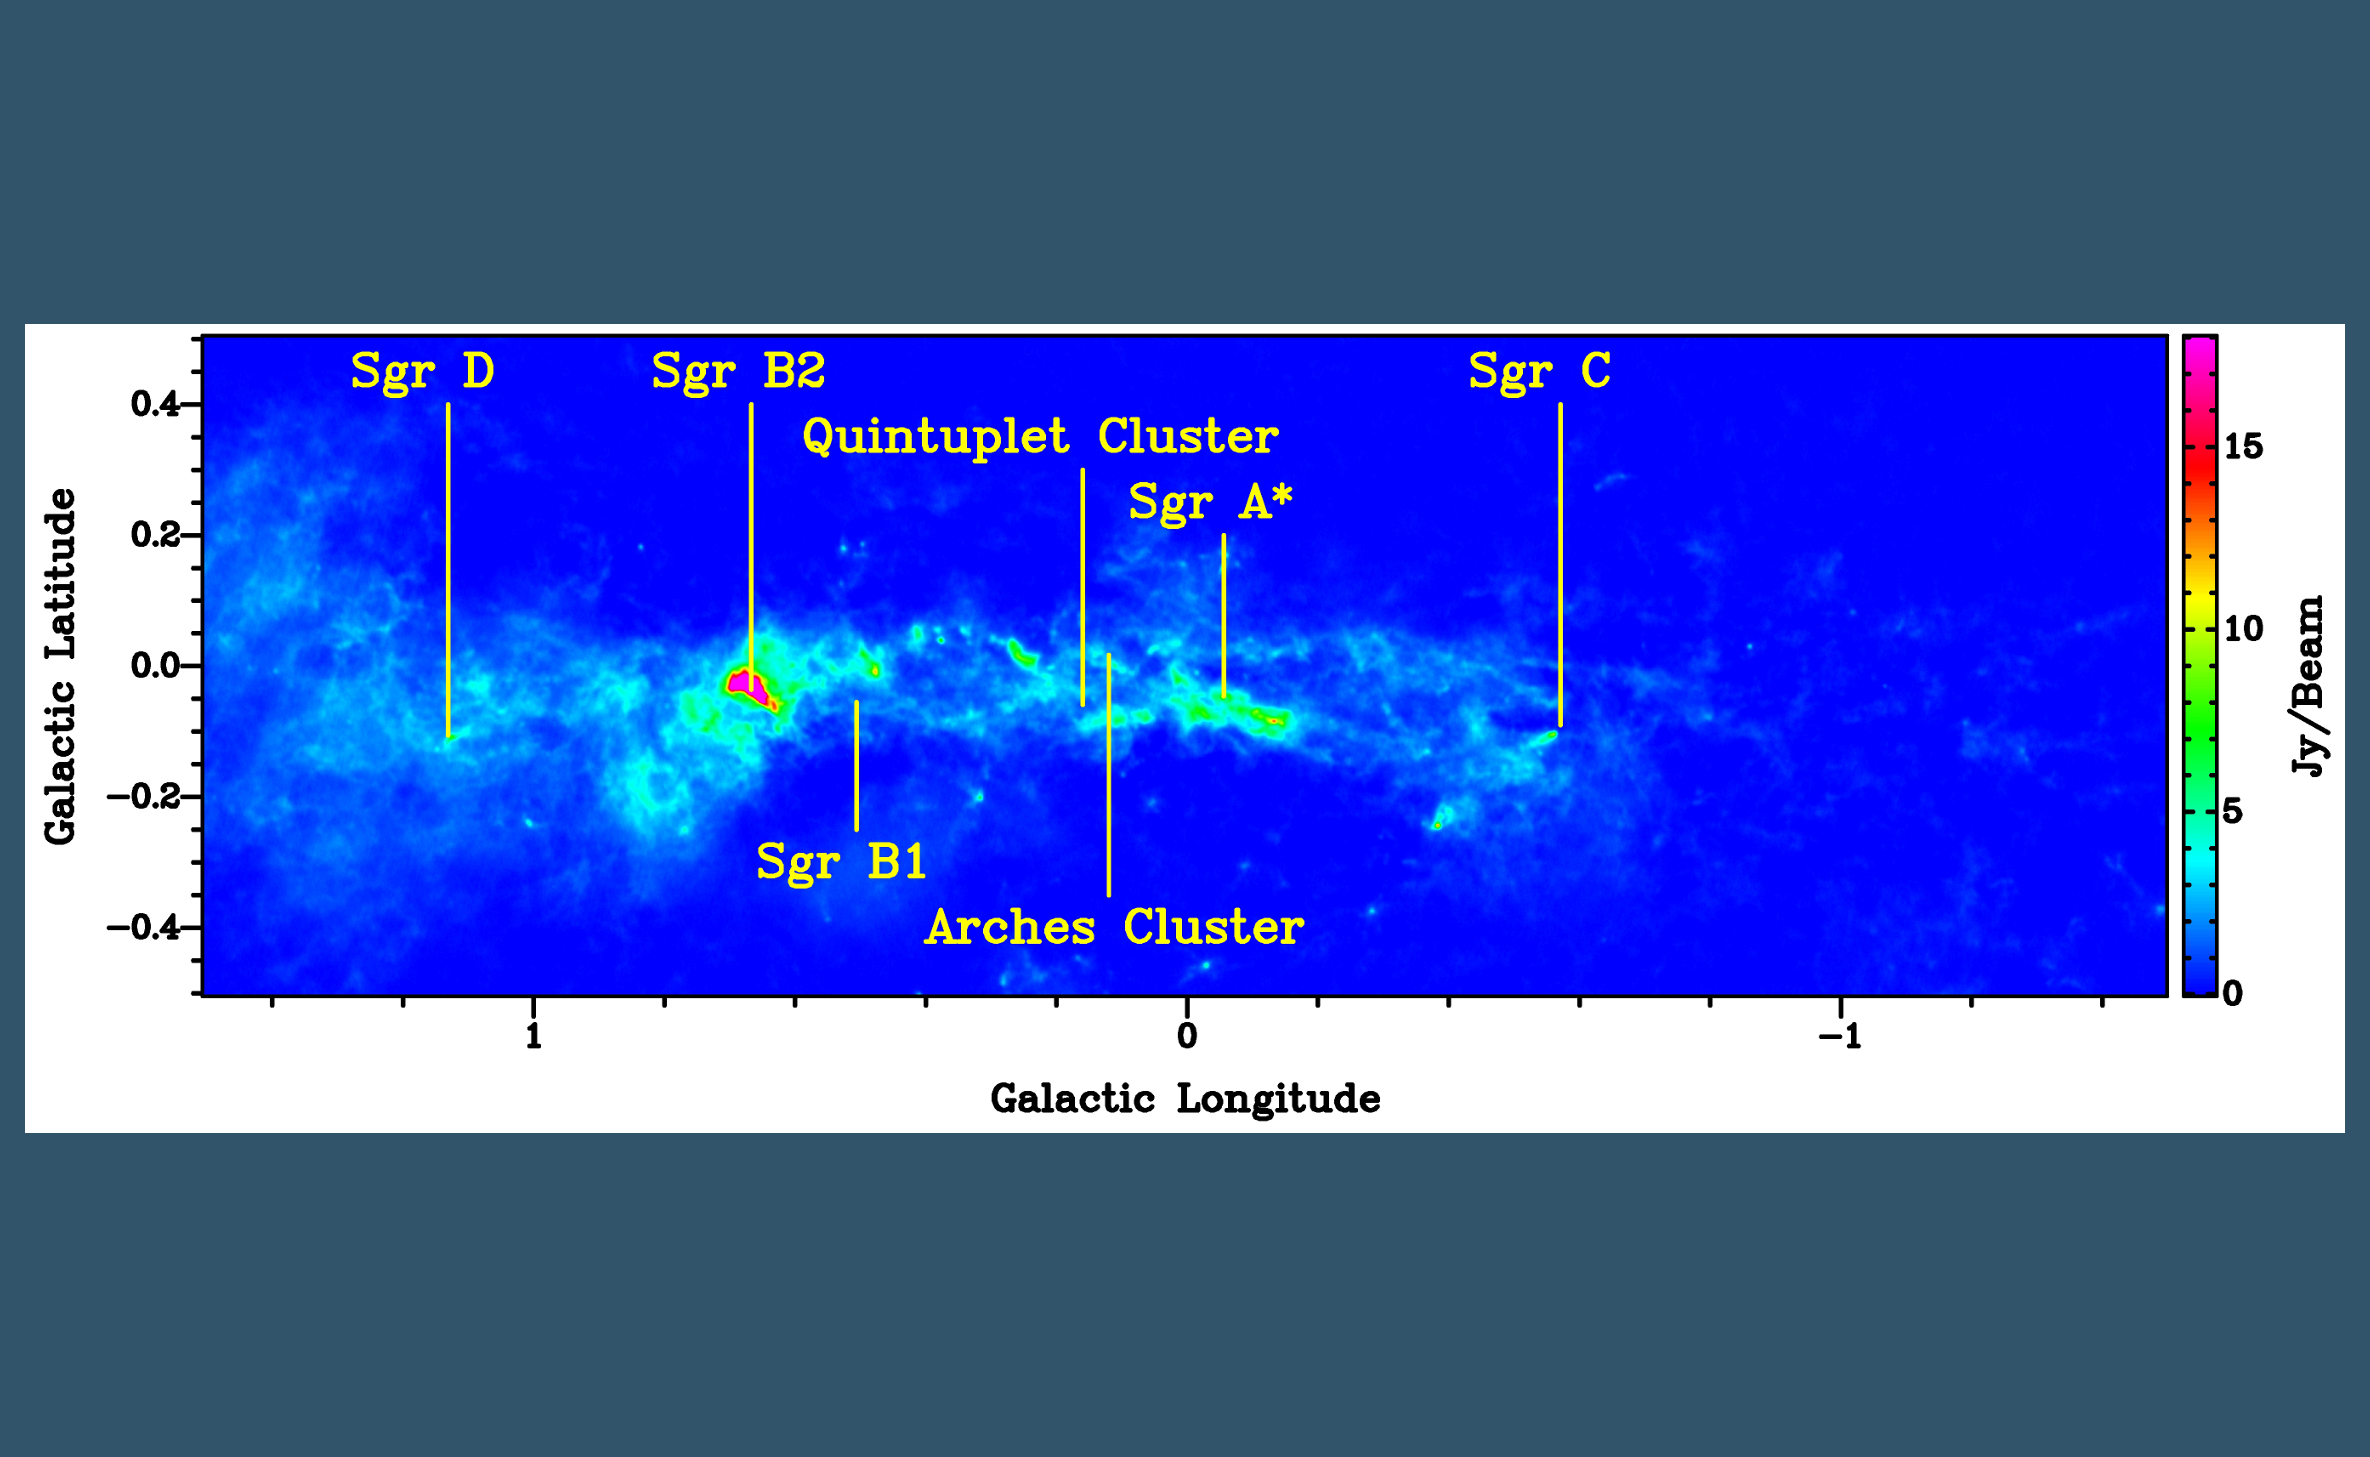 ATLASGAL image at 870 micron of the Central Molecular Zone